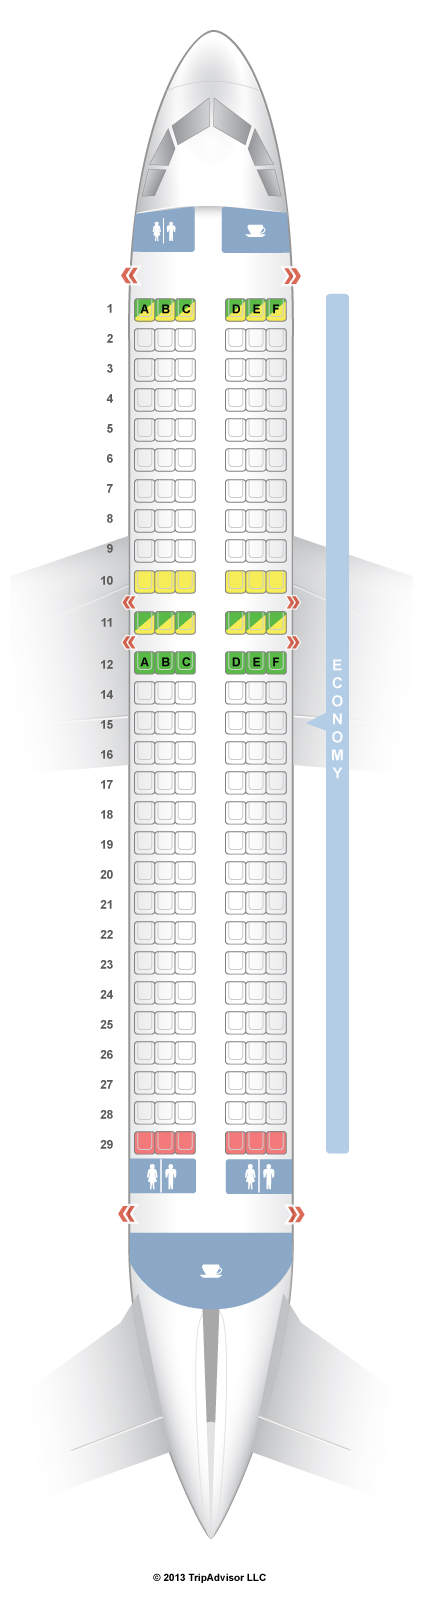 Airplane A320 Seating Chart